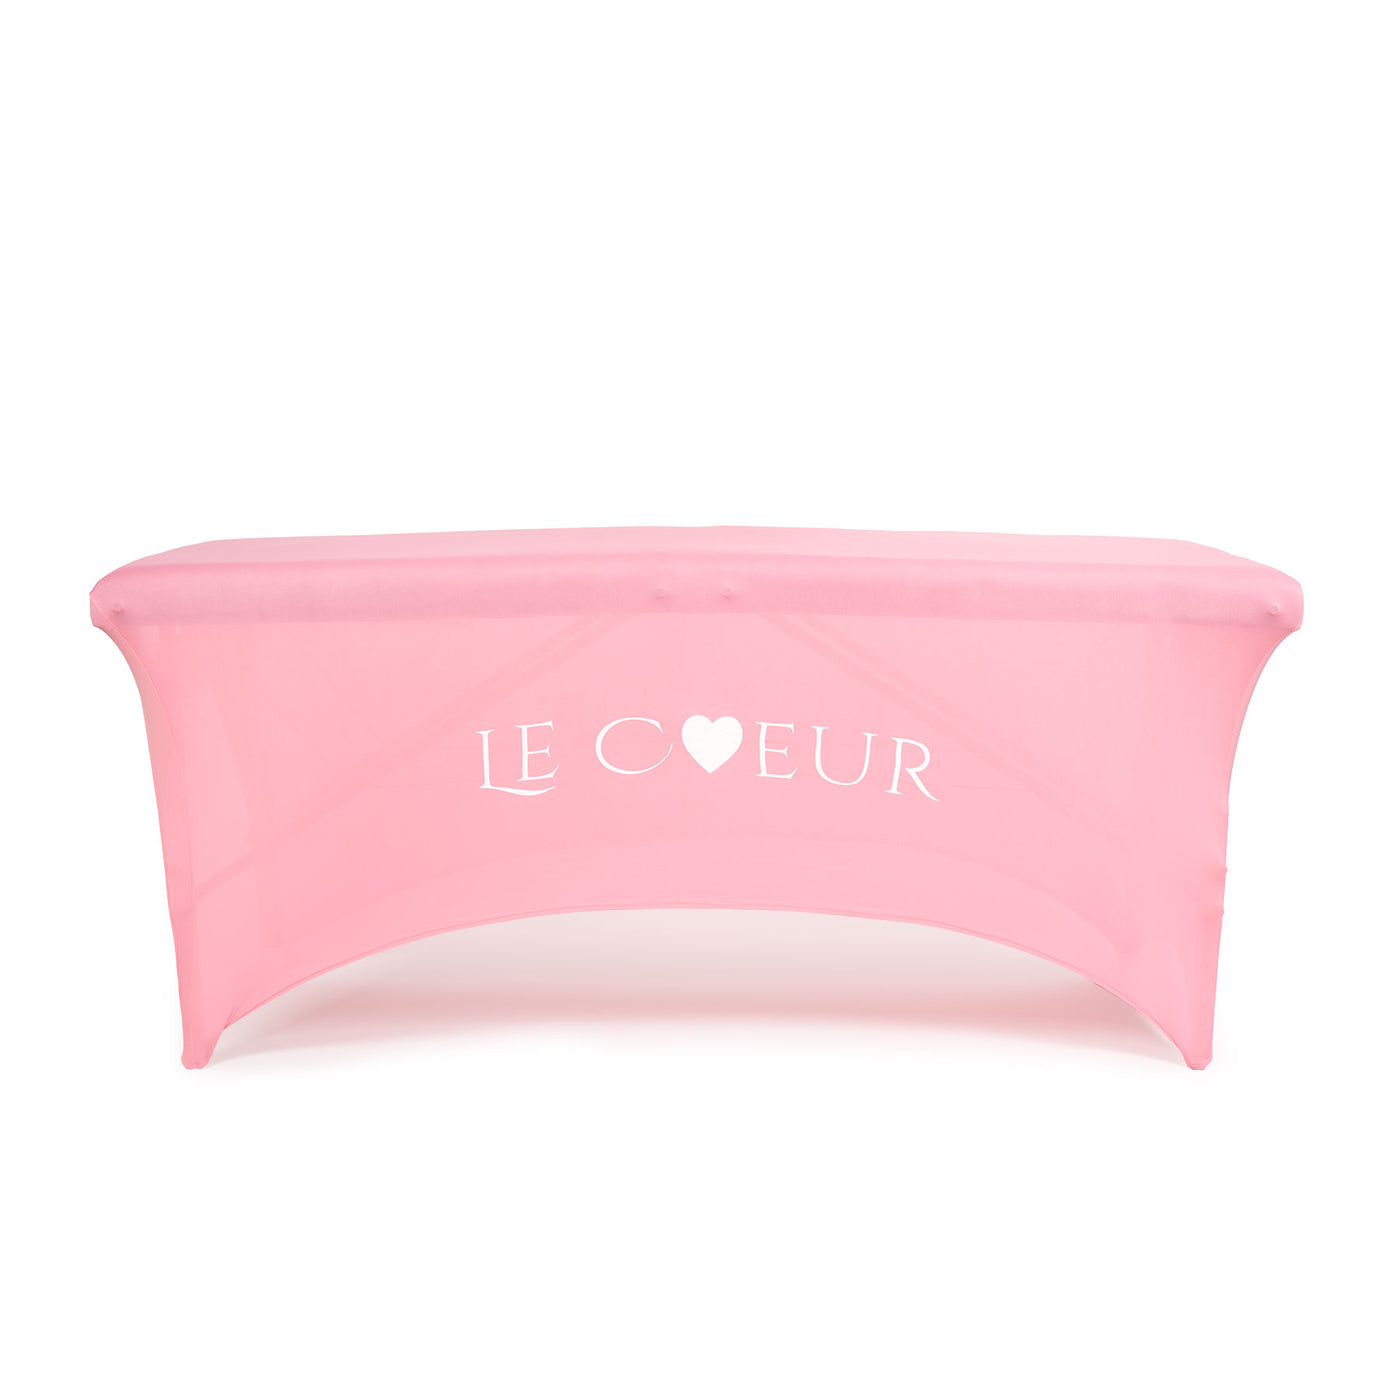 Le Coeur Custom Fitted Sheet for Massage Table